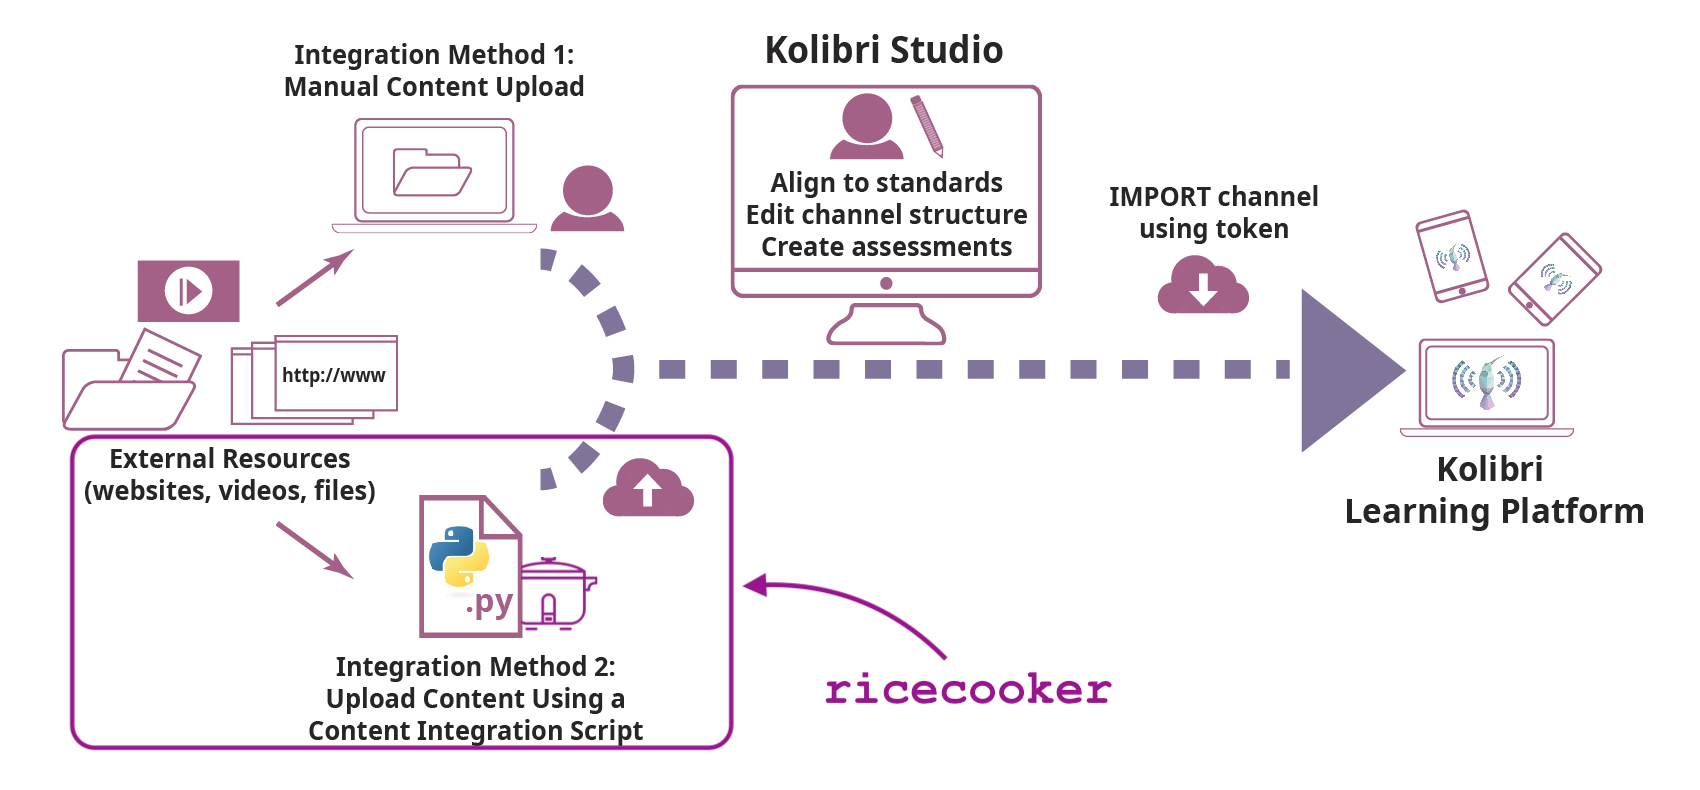 Overview of steps for integrating external content sources for use in the Kolibri Learning Platform